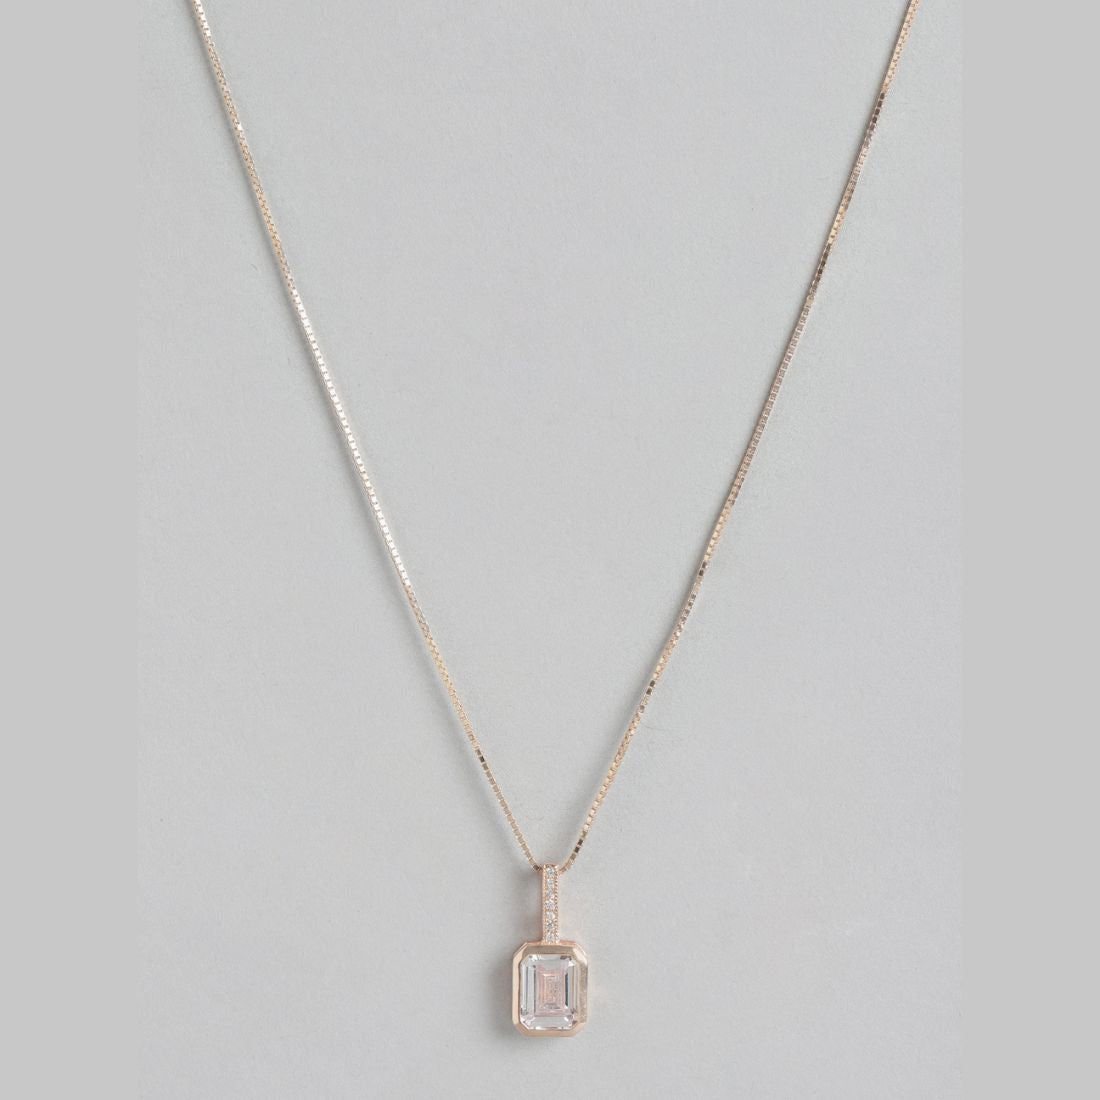 Blushing Beauty Rose Gold Plated 925 Sterling Silver Pendant with Cubic Zirconia